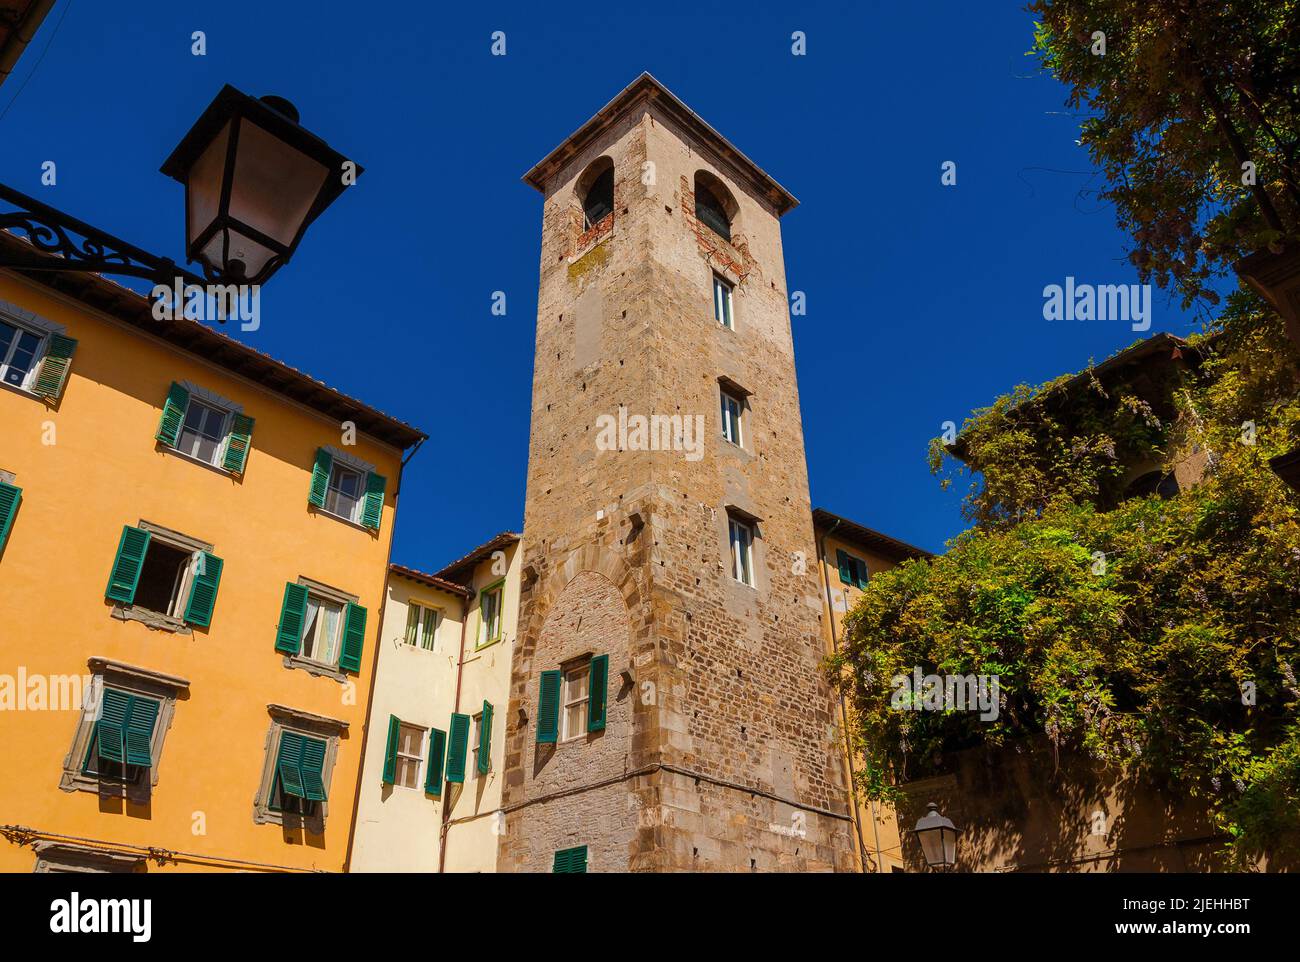 Pisa medieval historical center with ancient bell tower Stock Photo